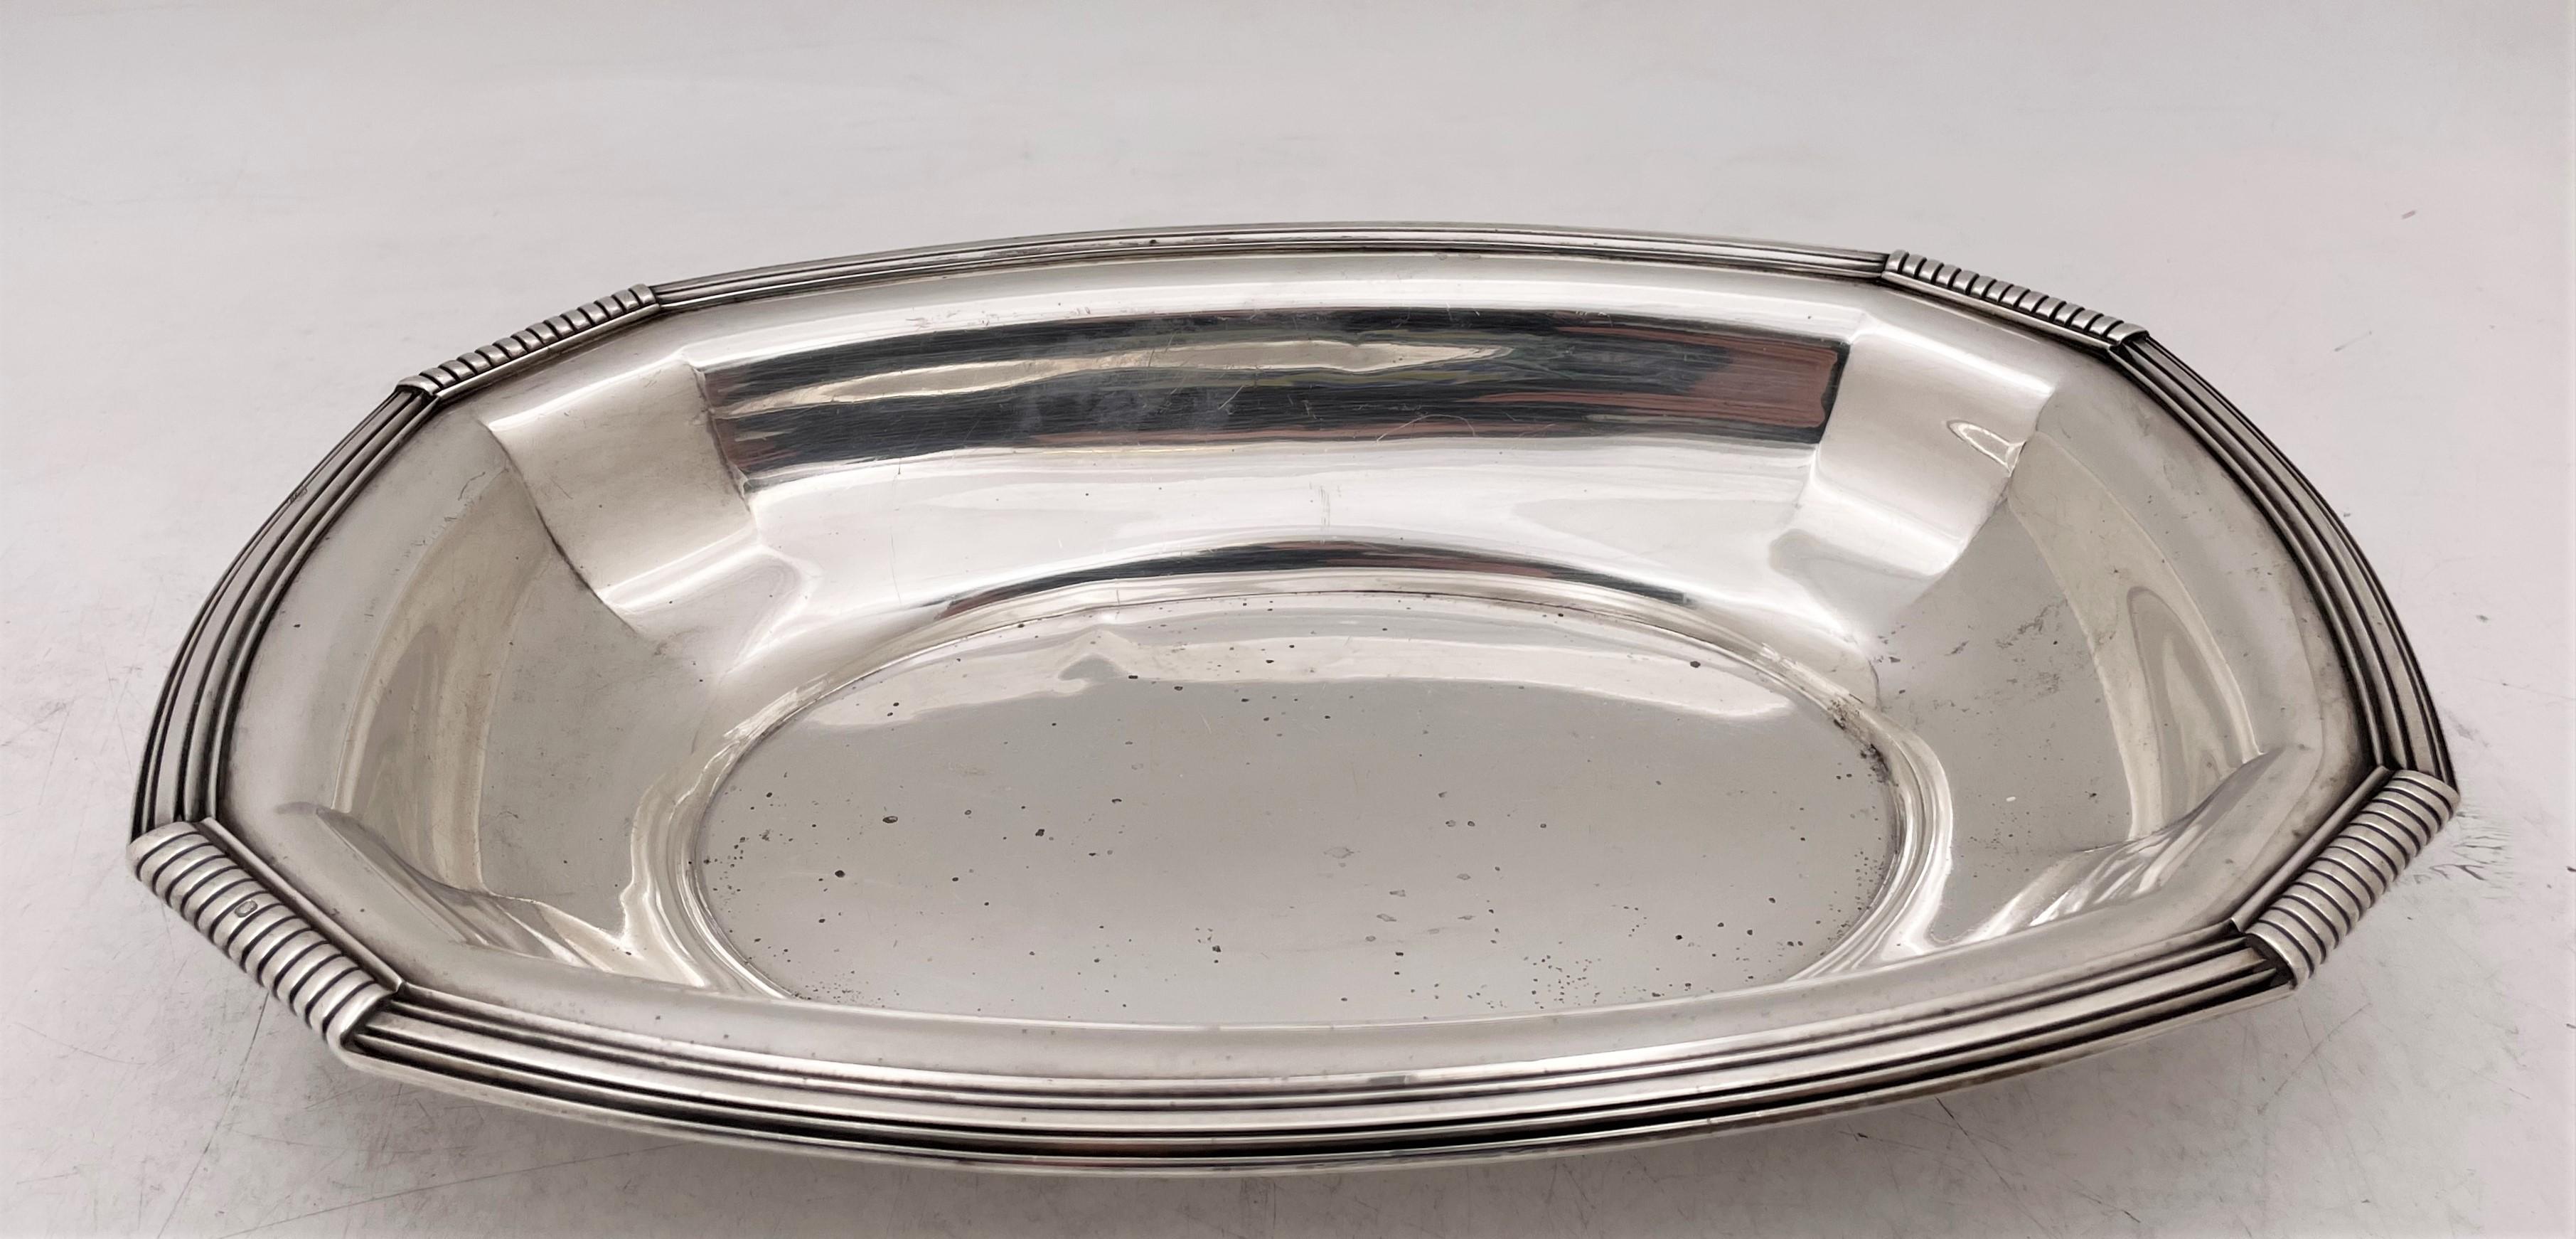 French, 0.950 (higher purity than sterling) multilobe silver bowl in Art Deco style, from the early 20th century, with a rim showcasing a rope and gadrooned motif. It measures 13'' in length by 9'' in width by 2 1/8'' in height, weighs 24 troy